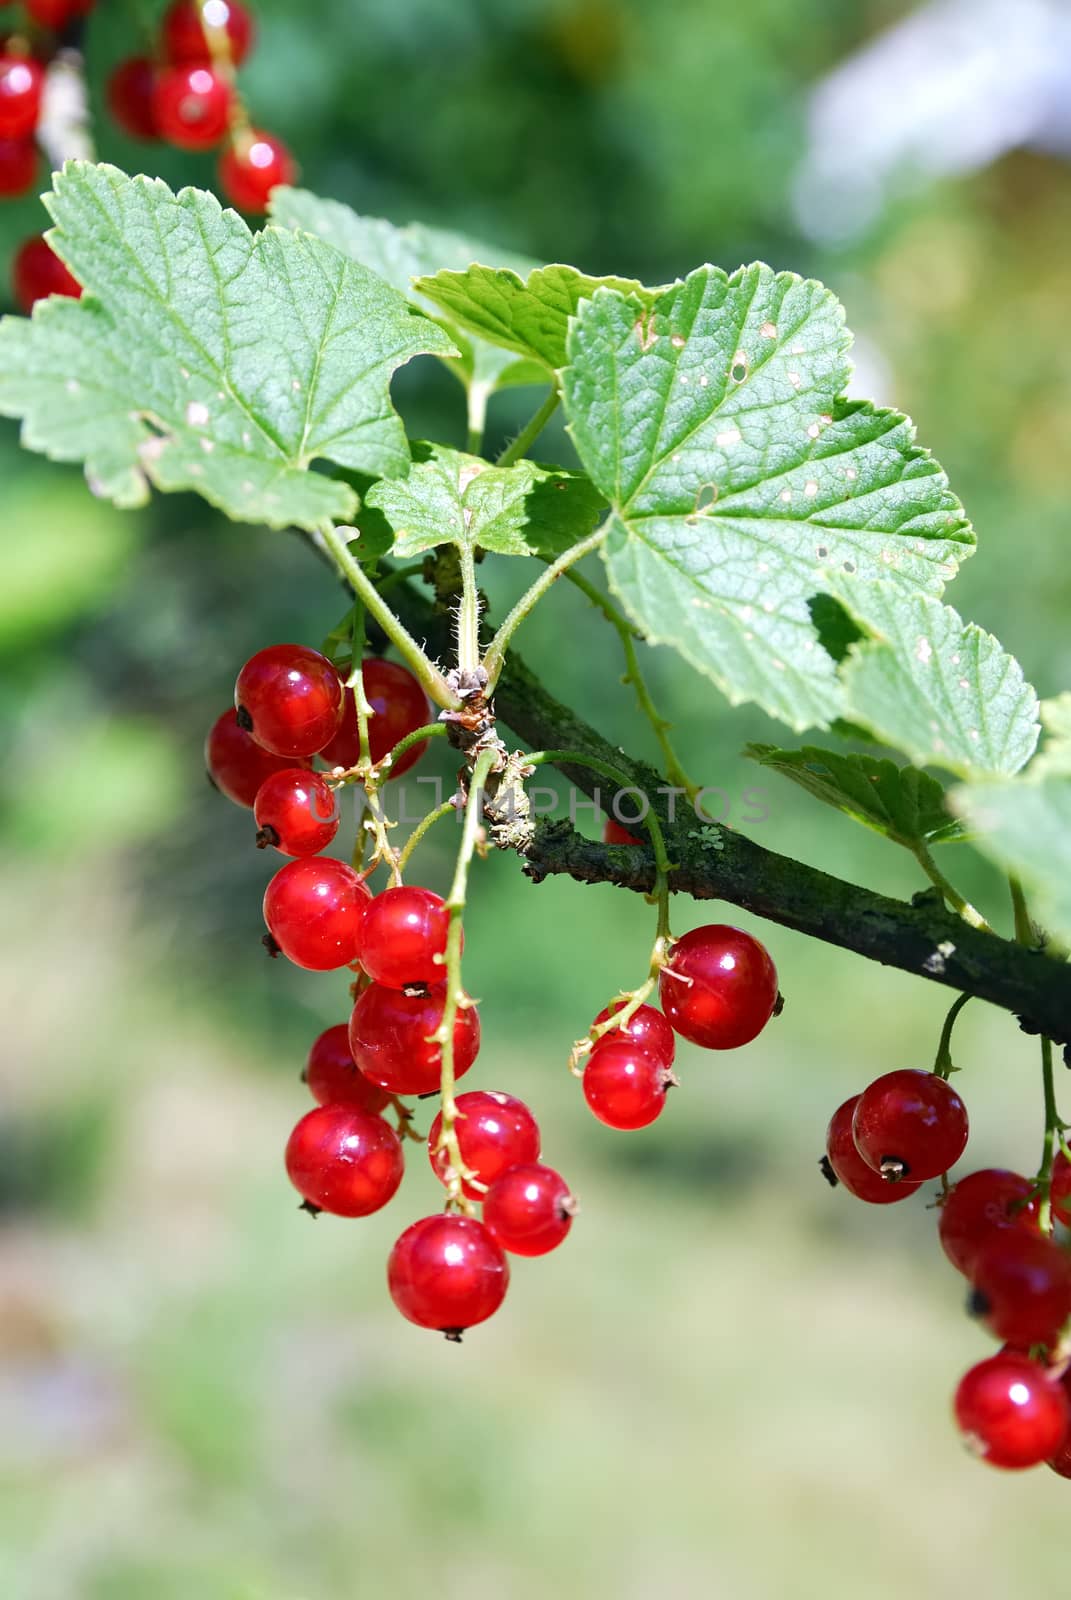 Red currants by a40757